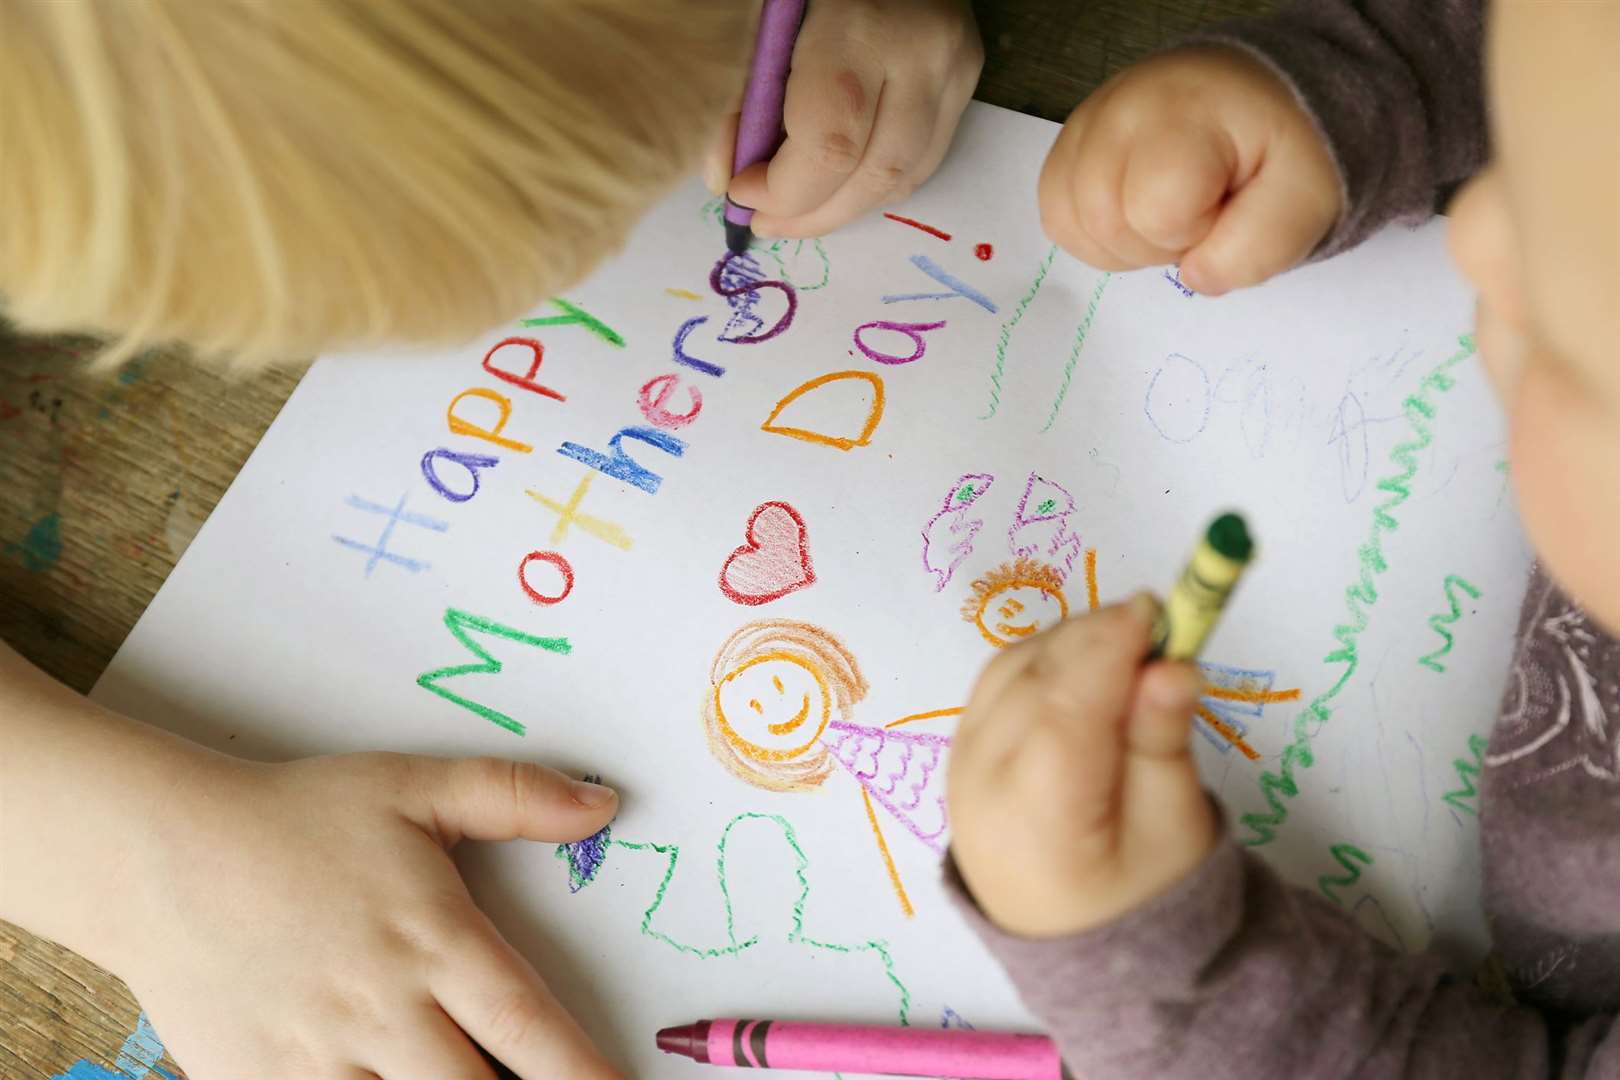 Did your child draw a Mother's Day picture?